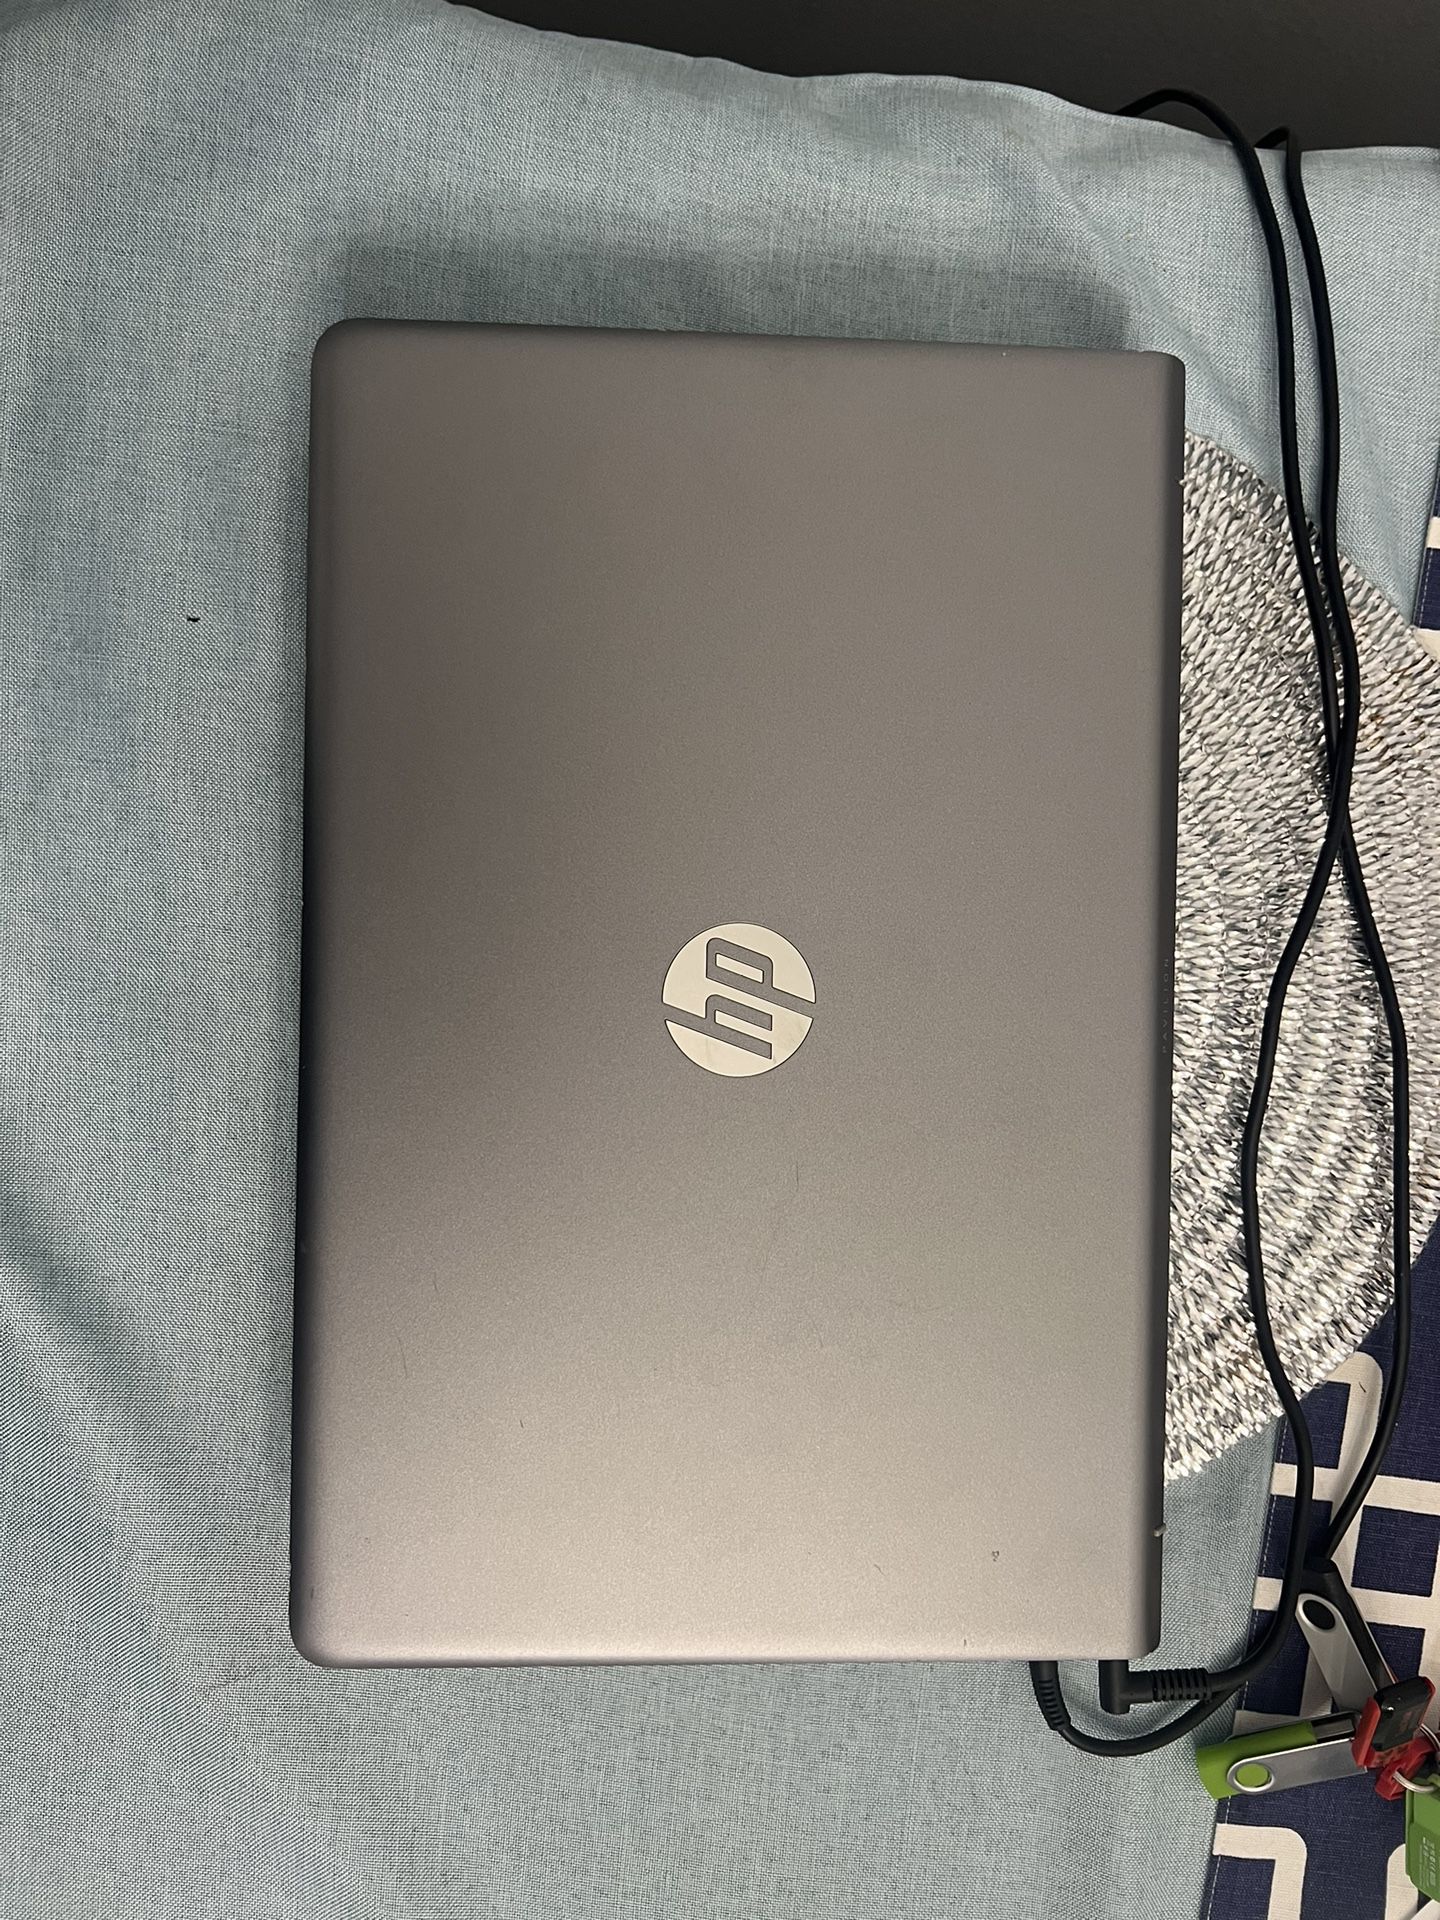 Hp Laptop With I5 Intel 8th generation 